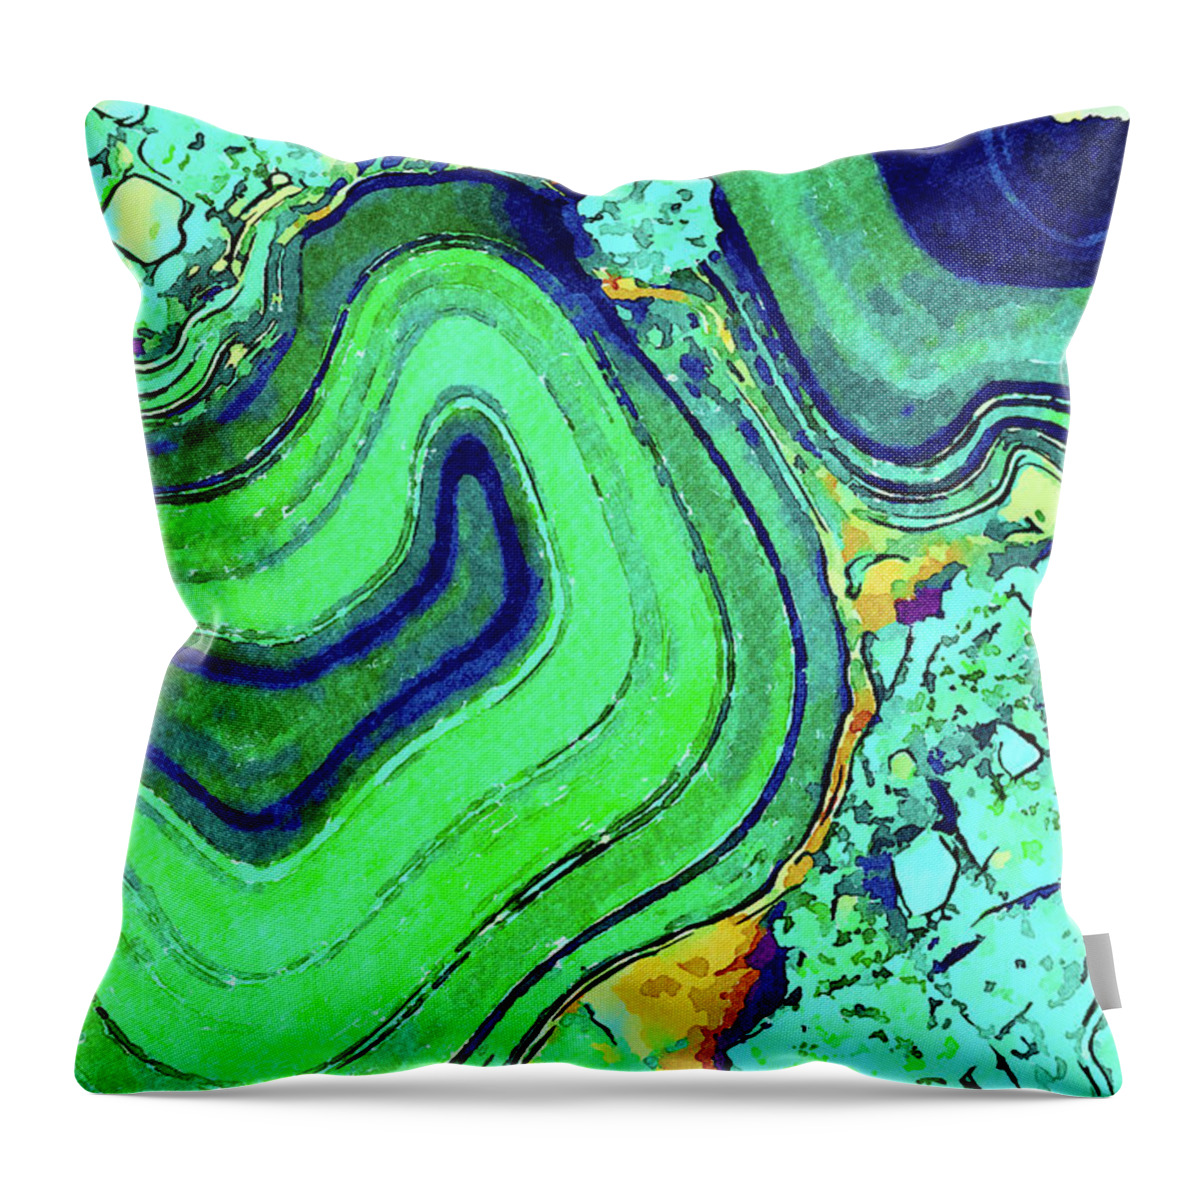 Abstract Throw Pillow featuring the mixed media Blue Green Agate Lapidary Abstract by Shelli Fitzpatrick